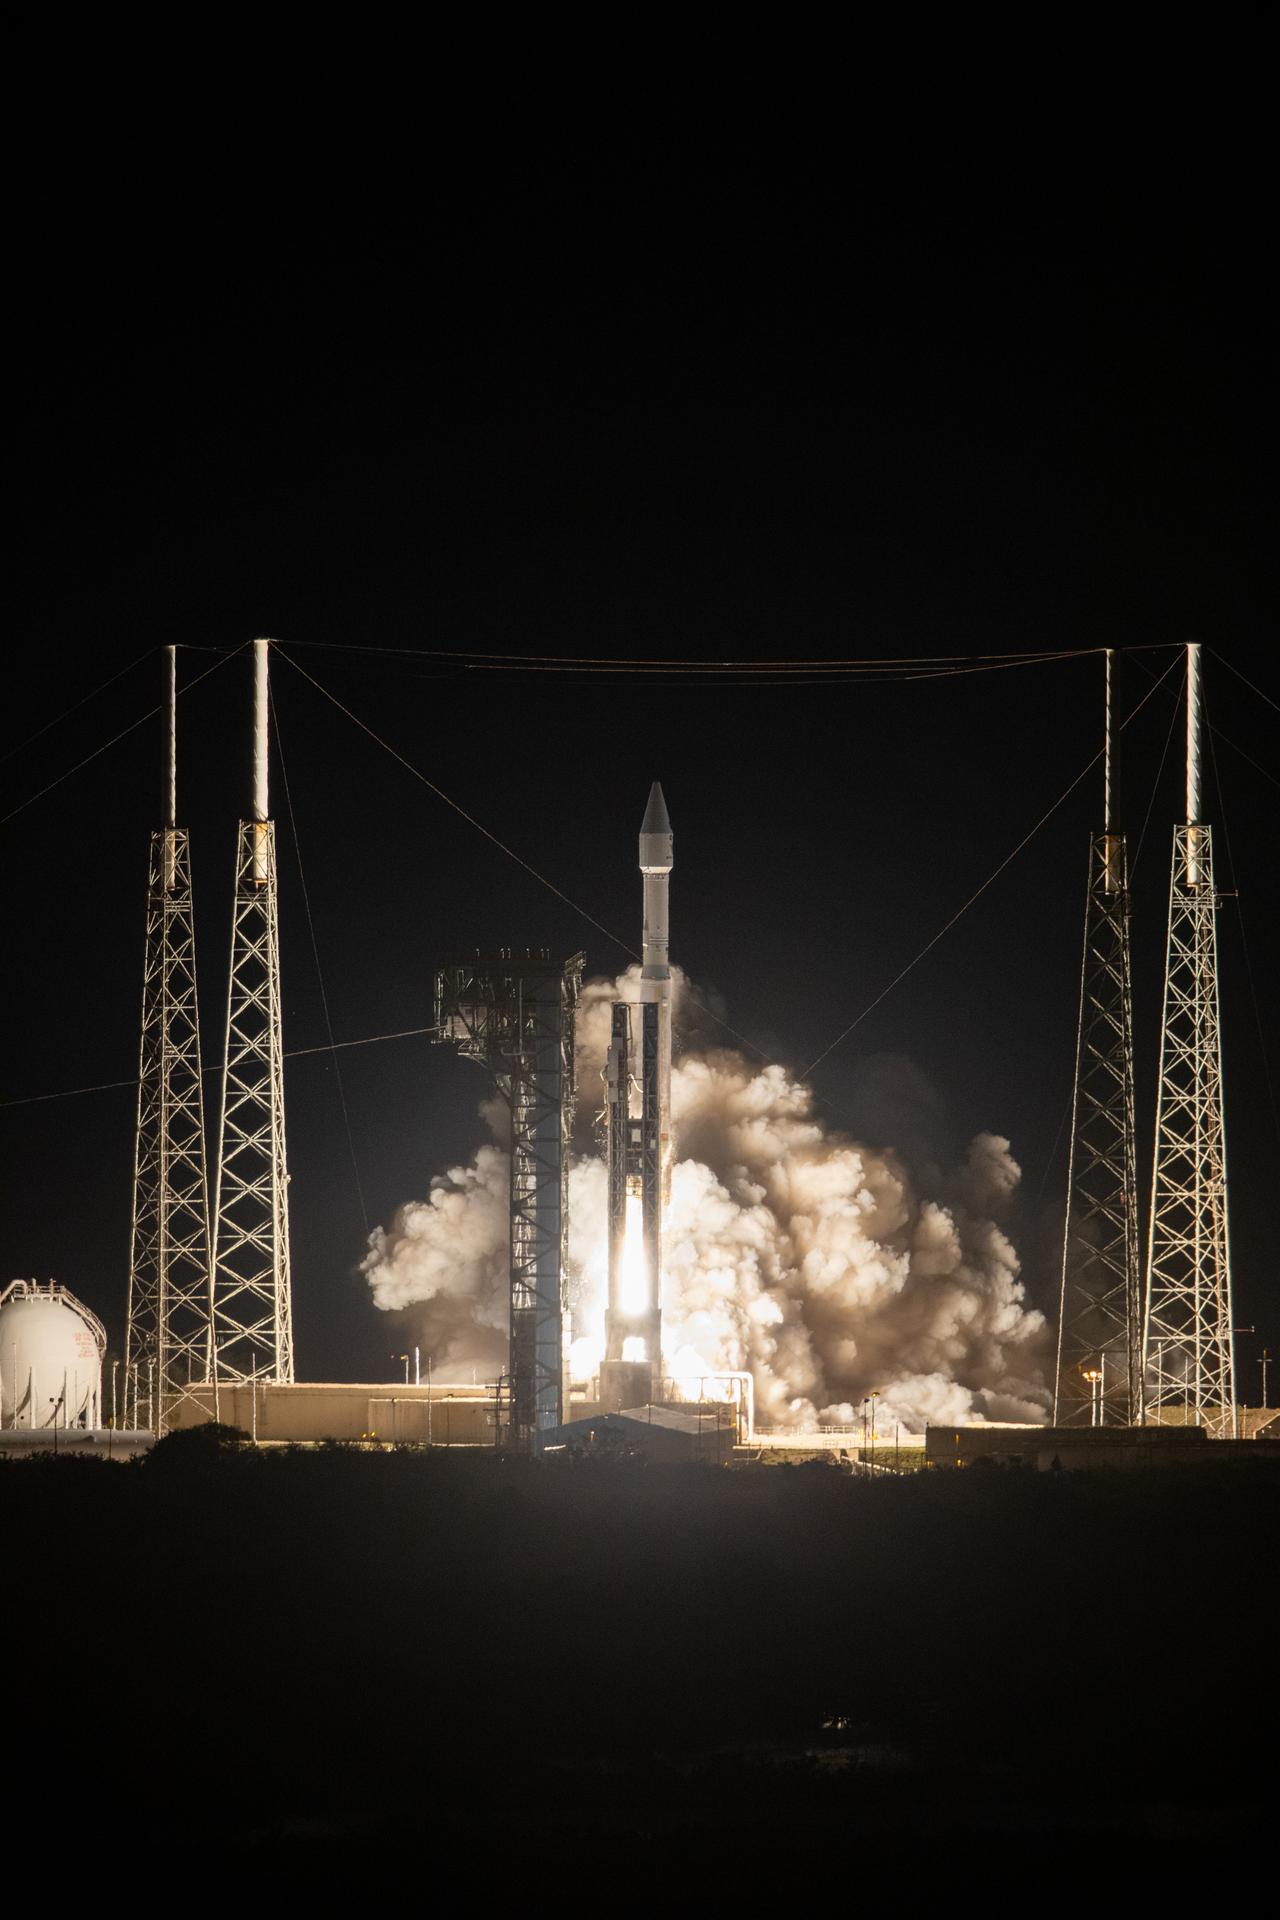 The ULA Atlas V rocket with the Solar Orbiter spacecraft lifts off Space Launch Complex 41 on Feb. 9, 2020 at 11:03 p.m. EST.